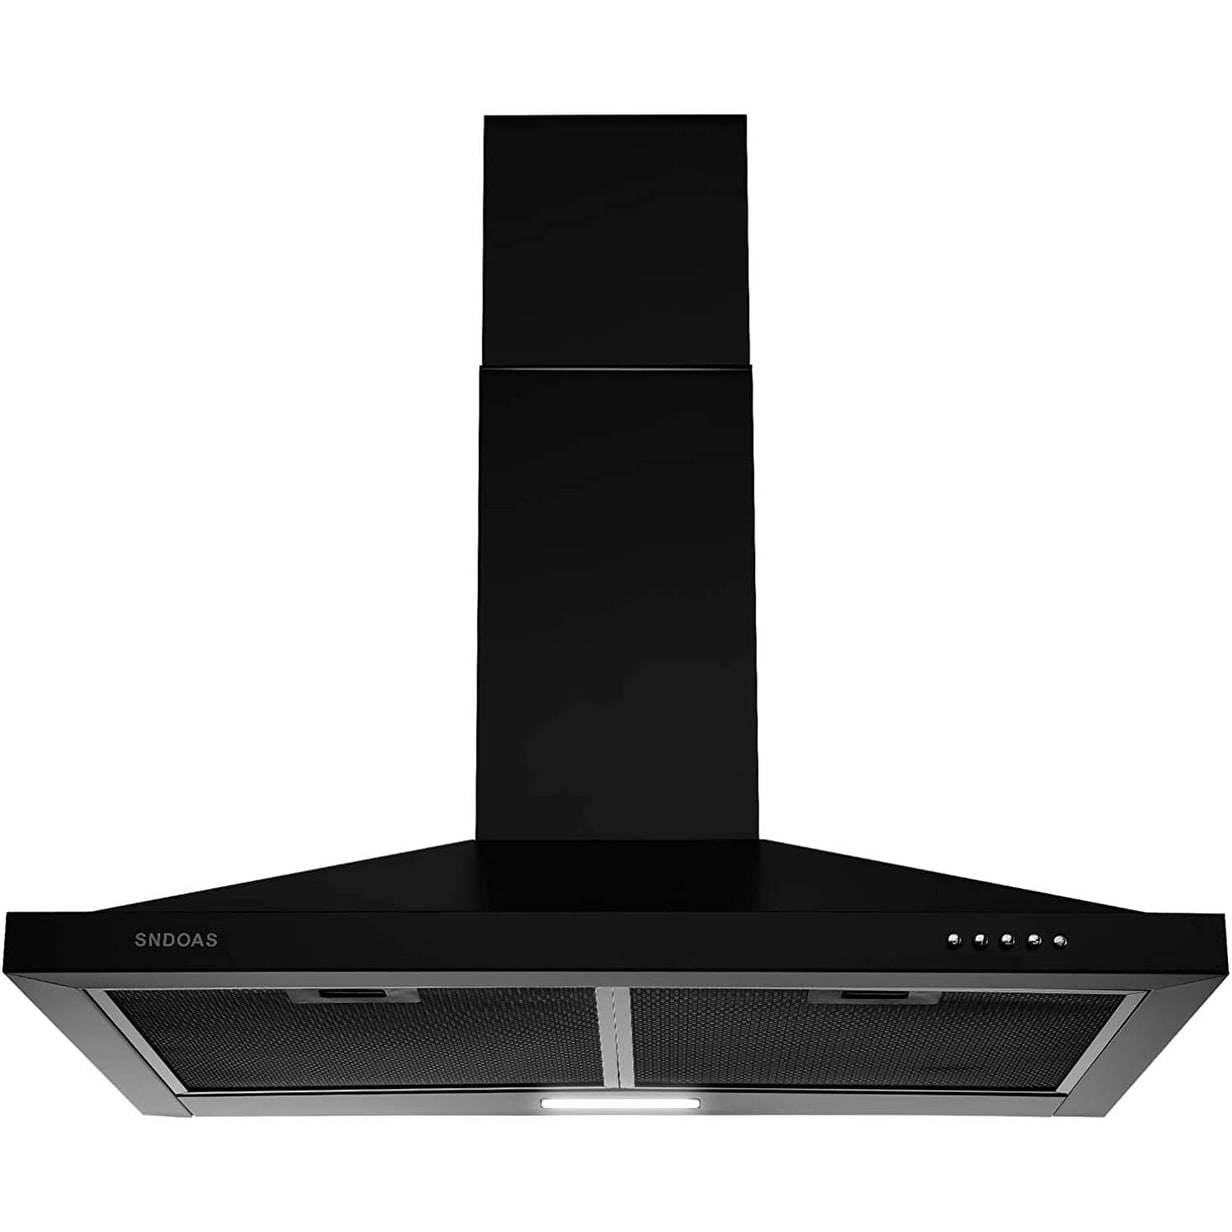 Tieasy Wall Mount Range Hood 30 inch Kitchen Hood 700 CFM with Ducted/Ductless Convertible Duct, Touch Control, Permanent Filters, Stainless Steel, 3